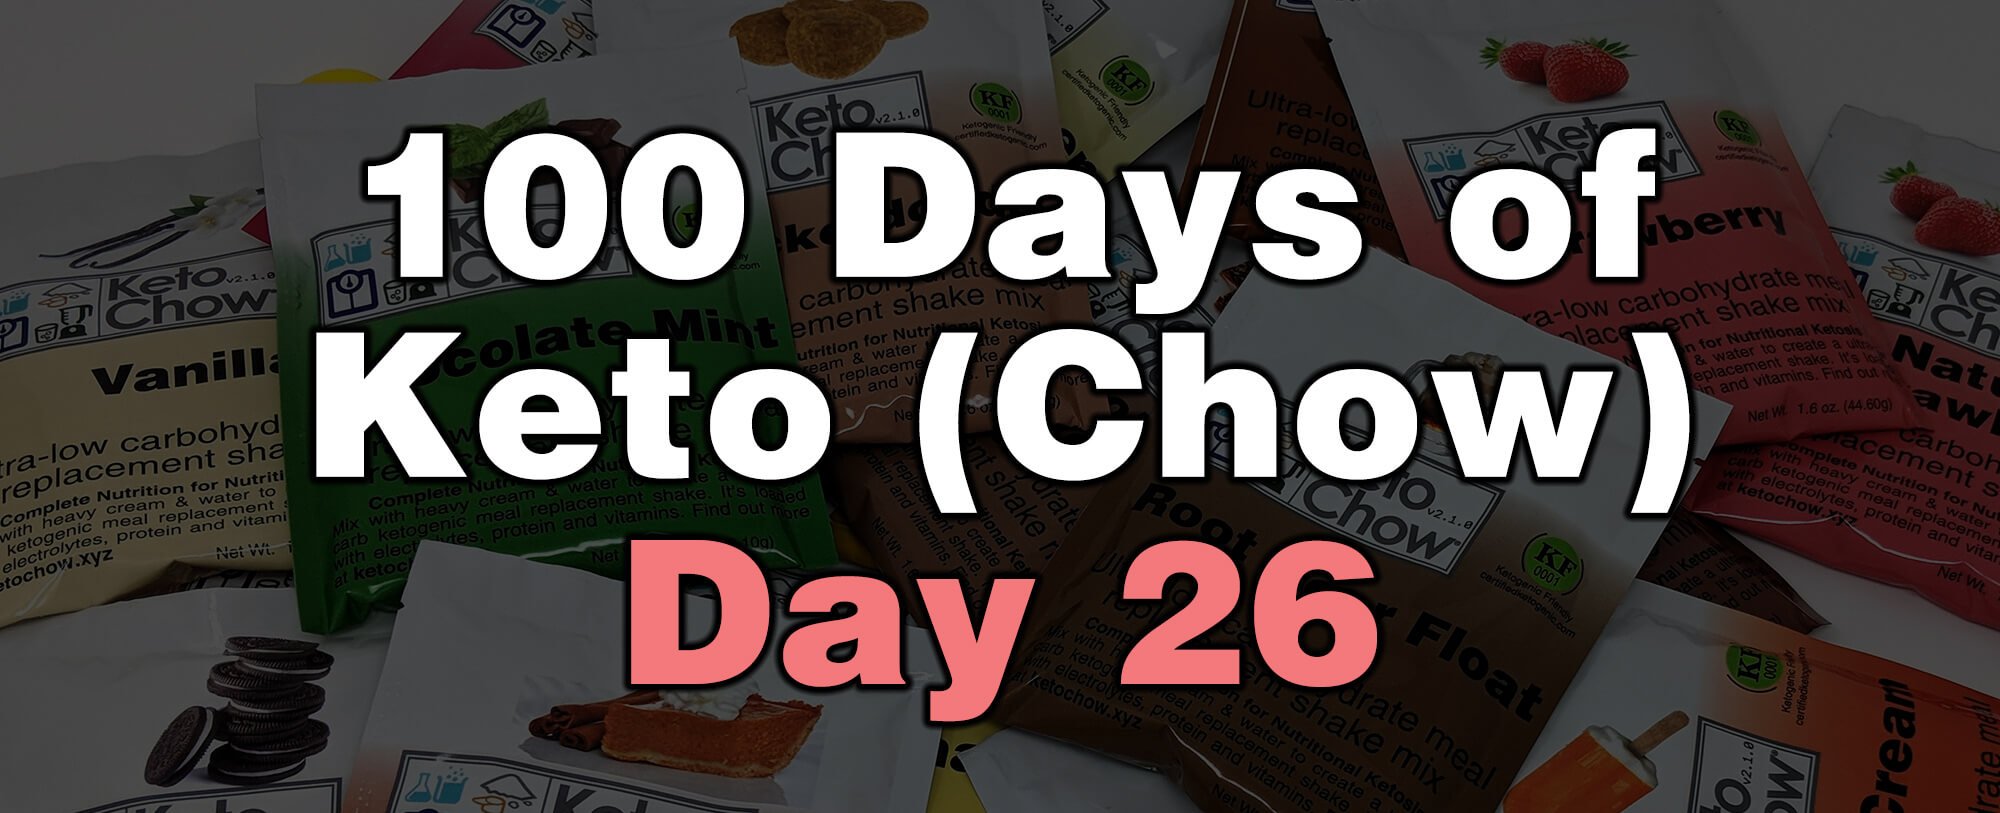 100 days of keto chow day 26